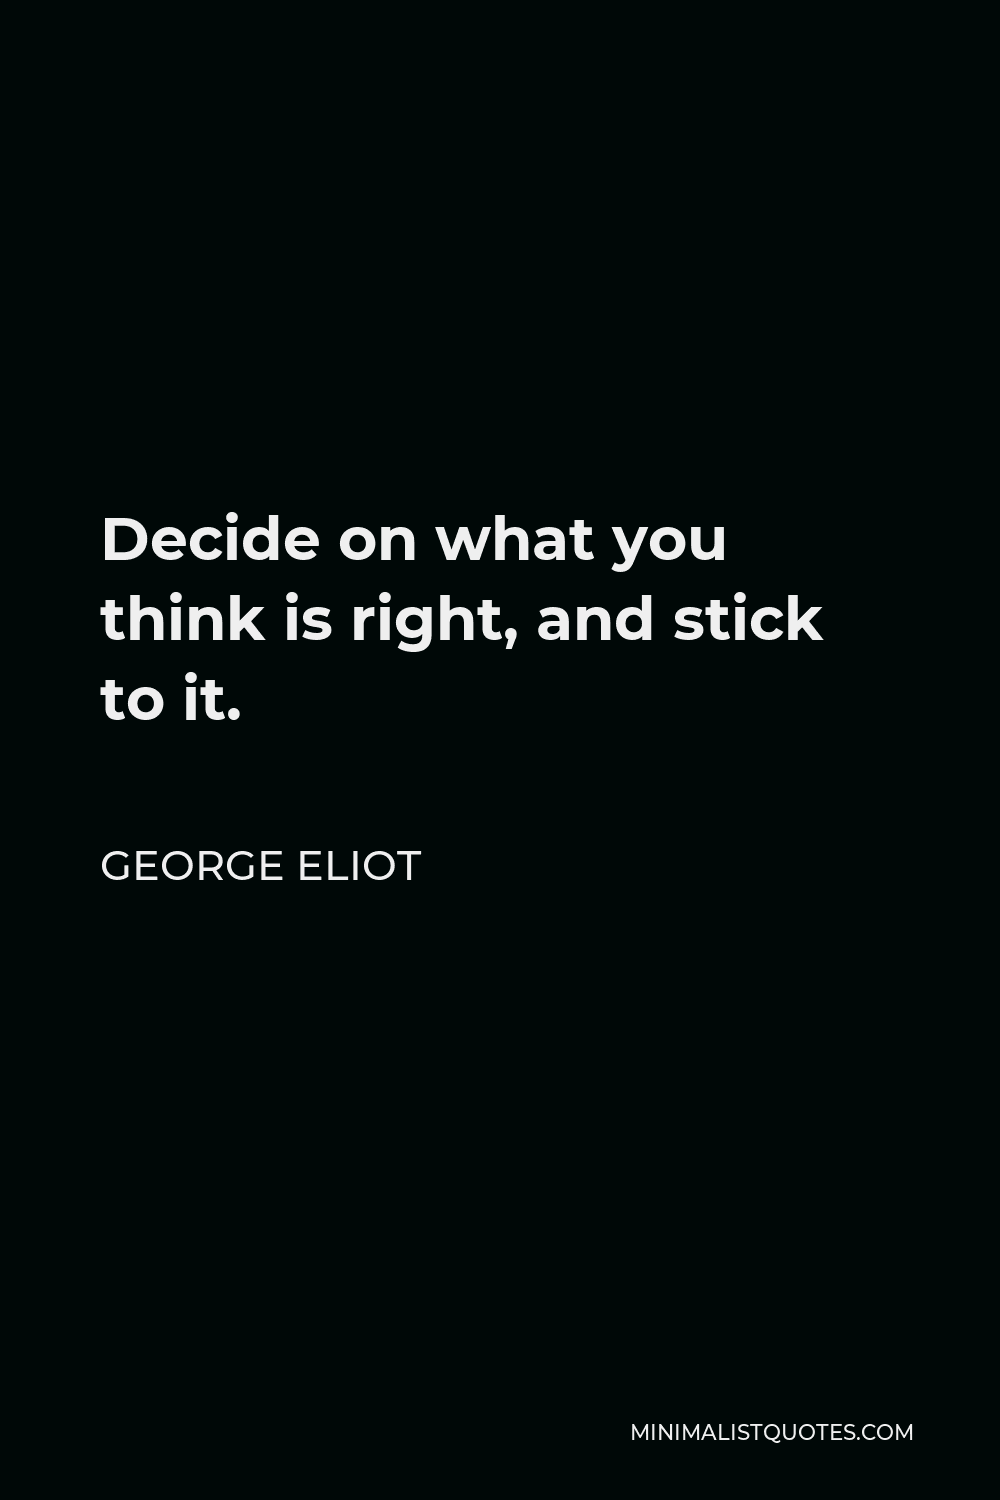 George Eliot Quote - Decide on what you think is right, and stick to it.